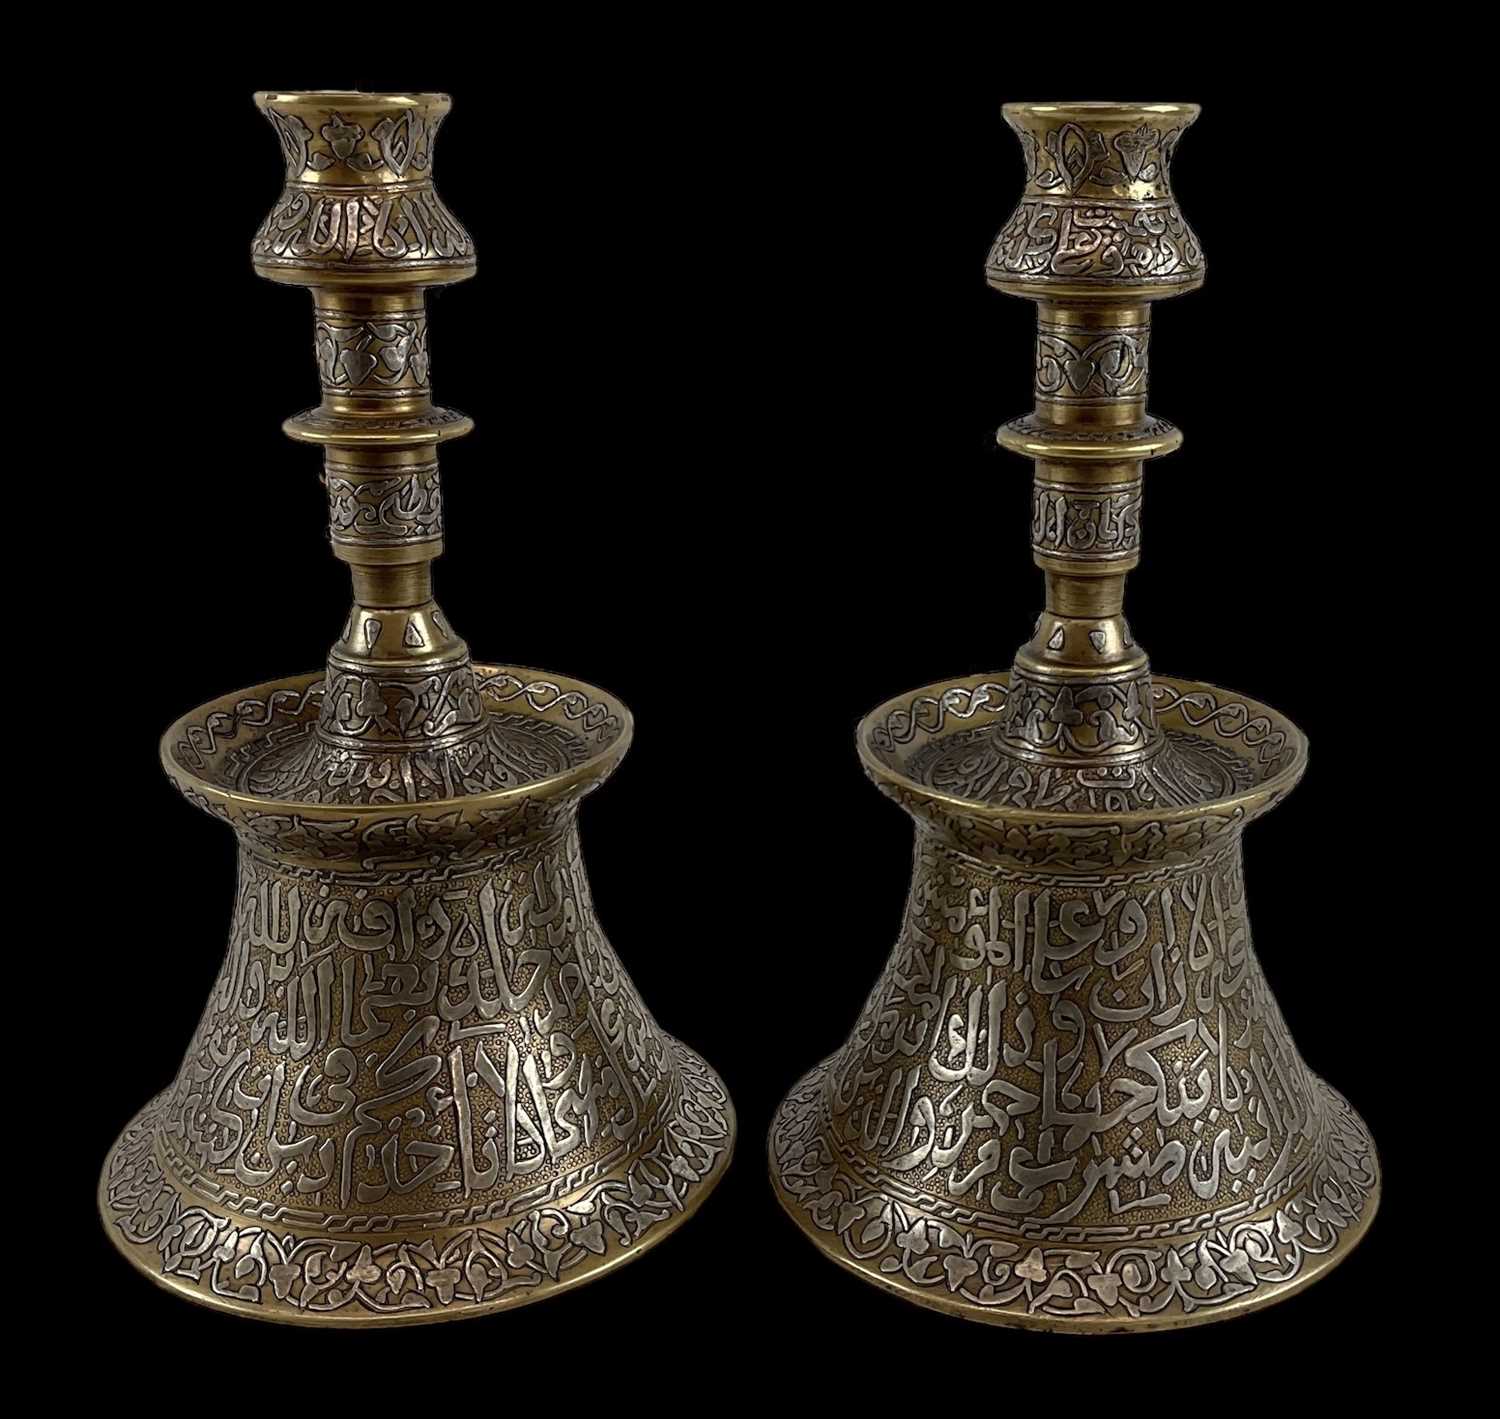 A pair of Islamic brass and silver inlaid candlesticks with Arabic calligraphy, height 30cm.